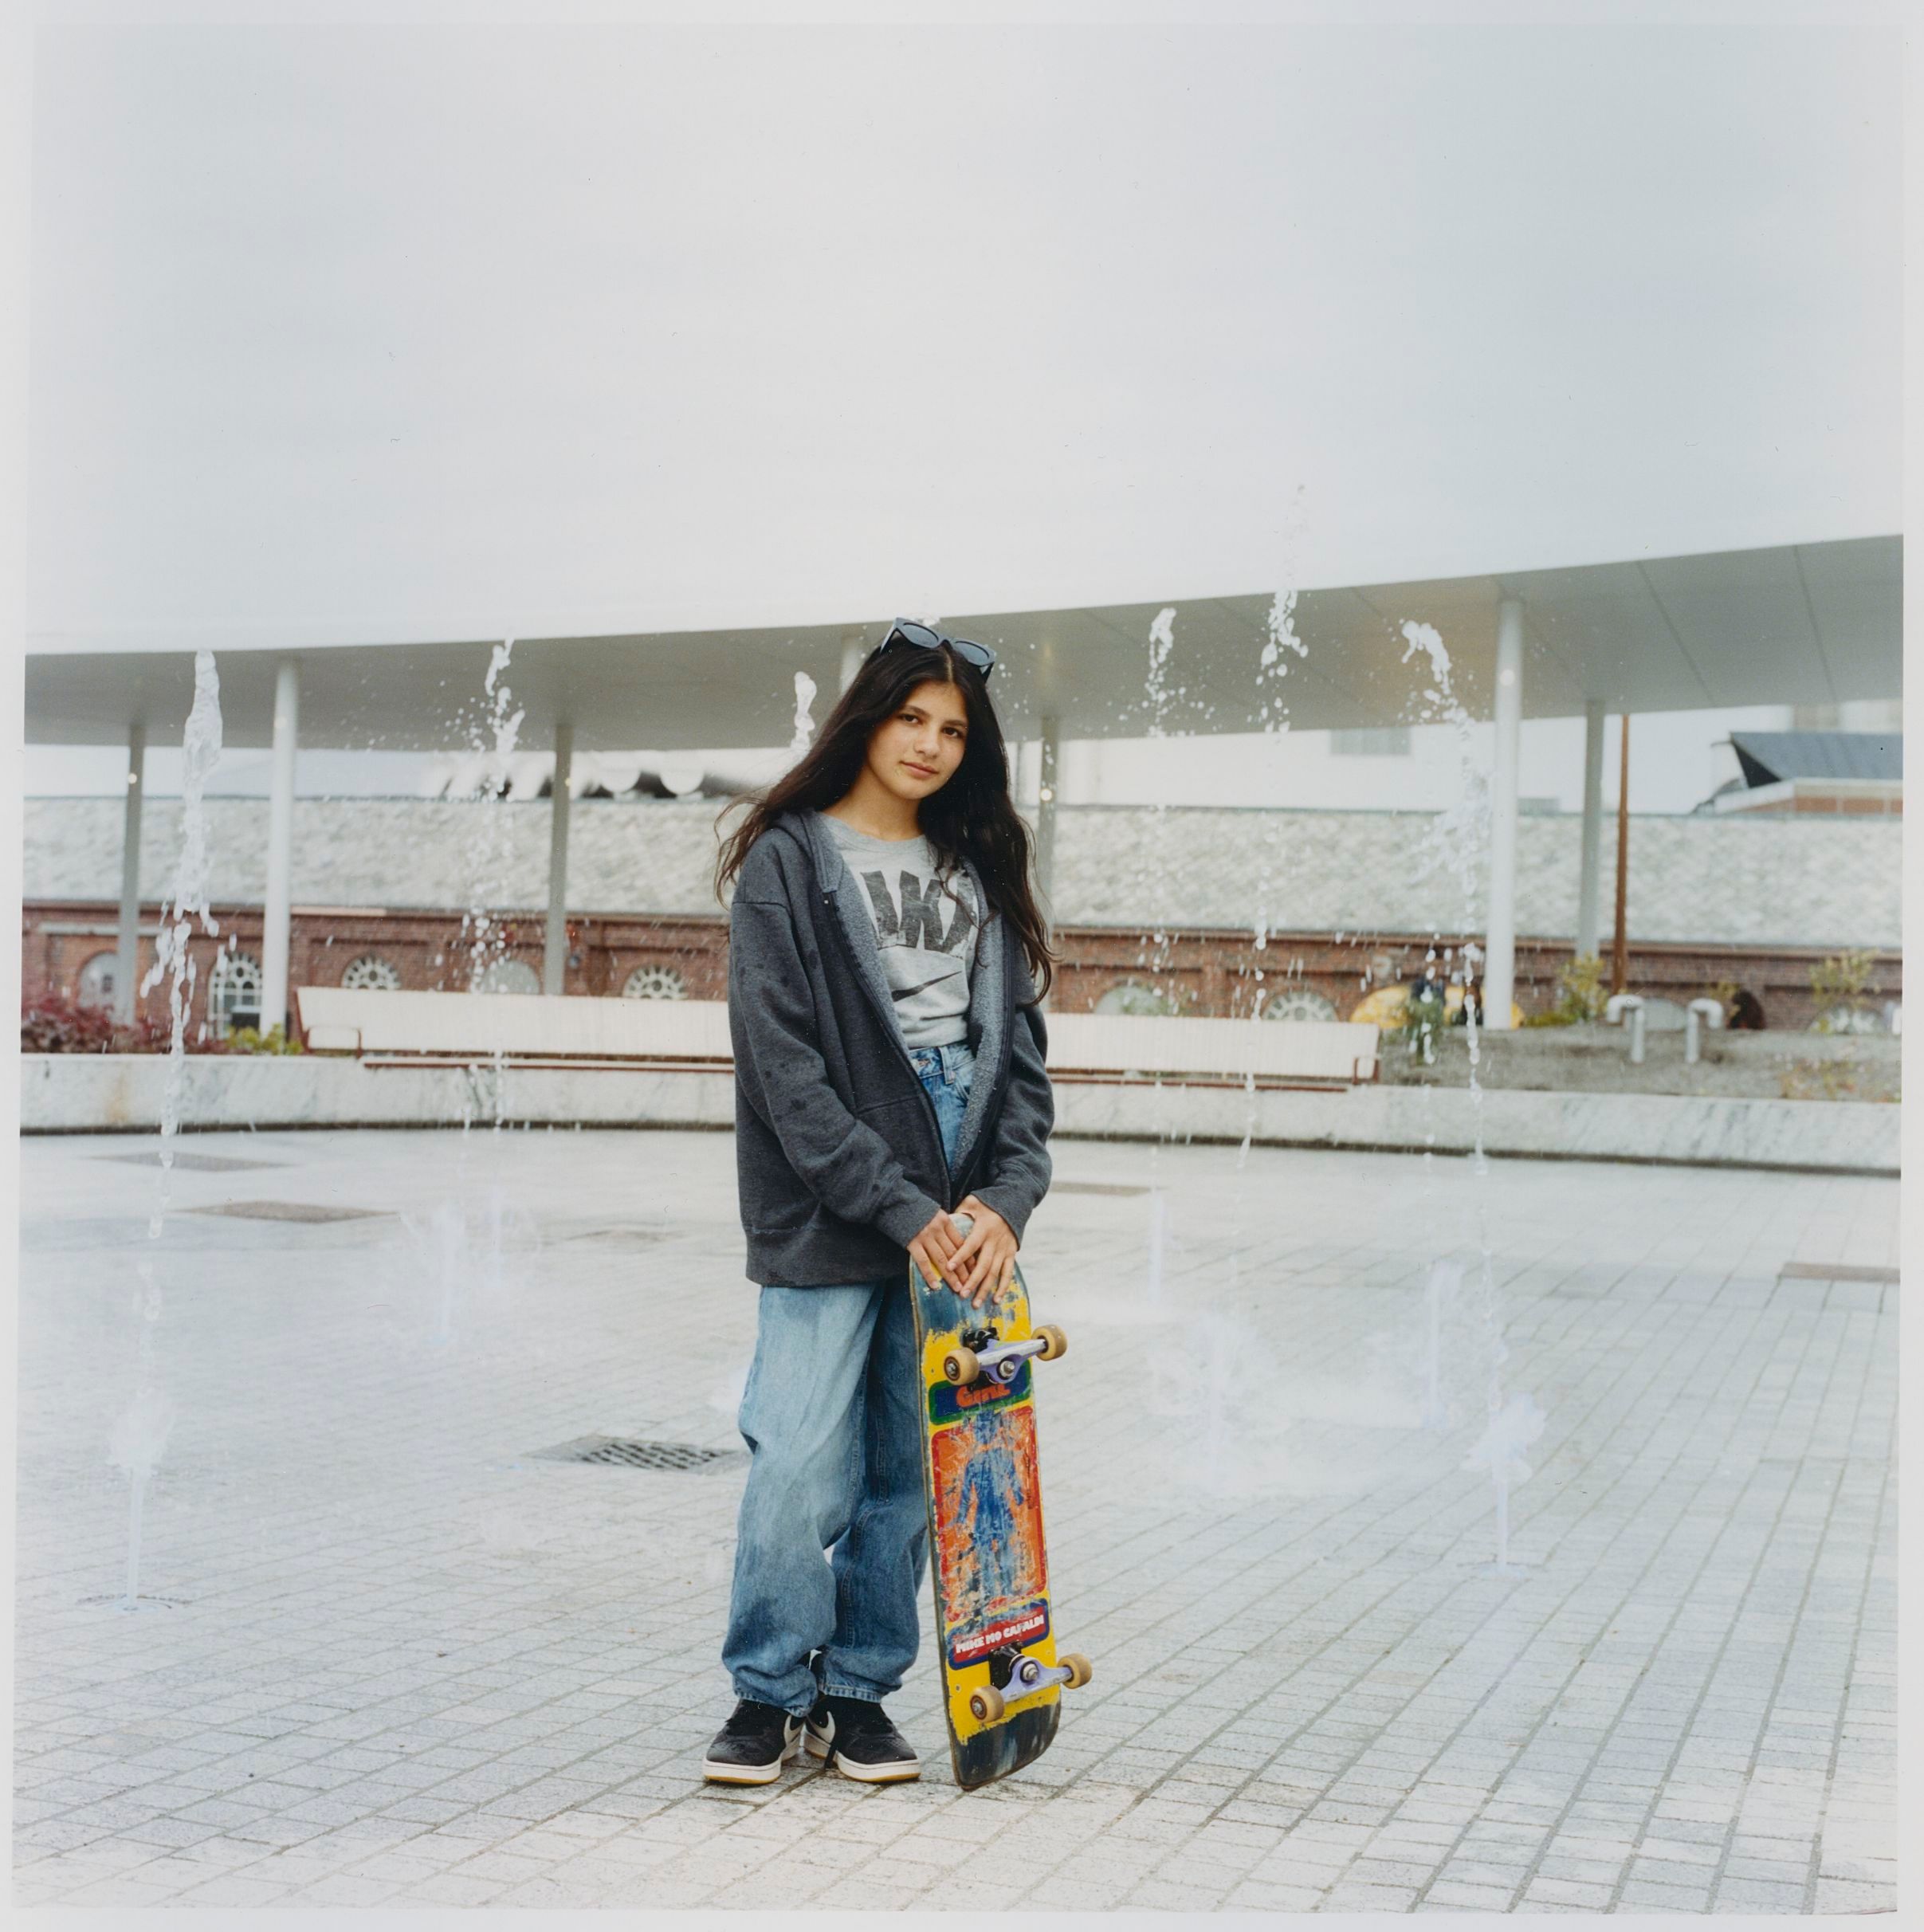 Photo of young girl holding a skateboard